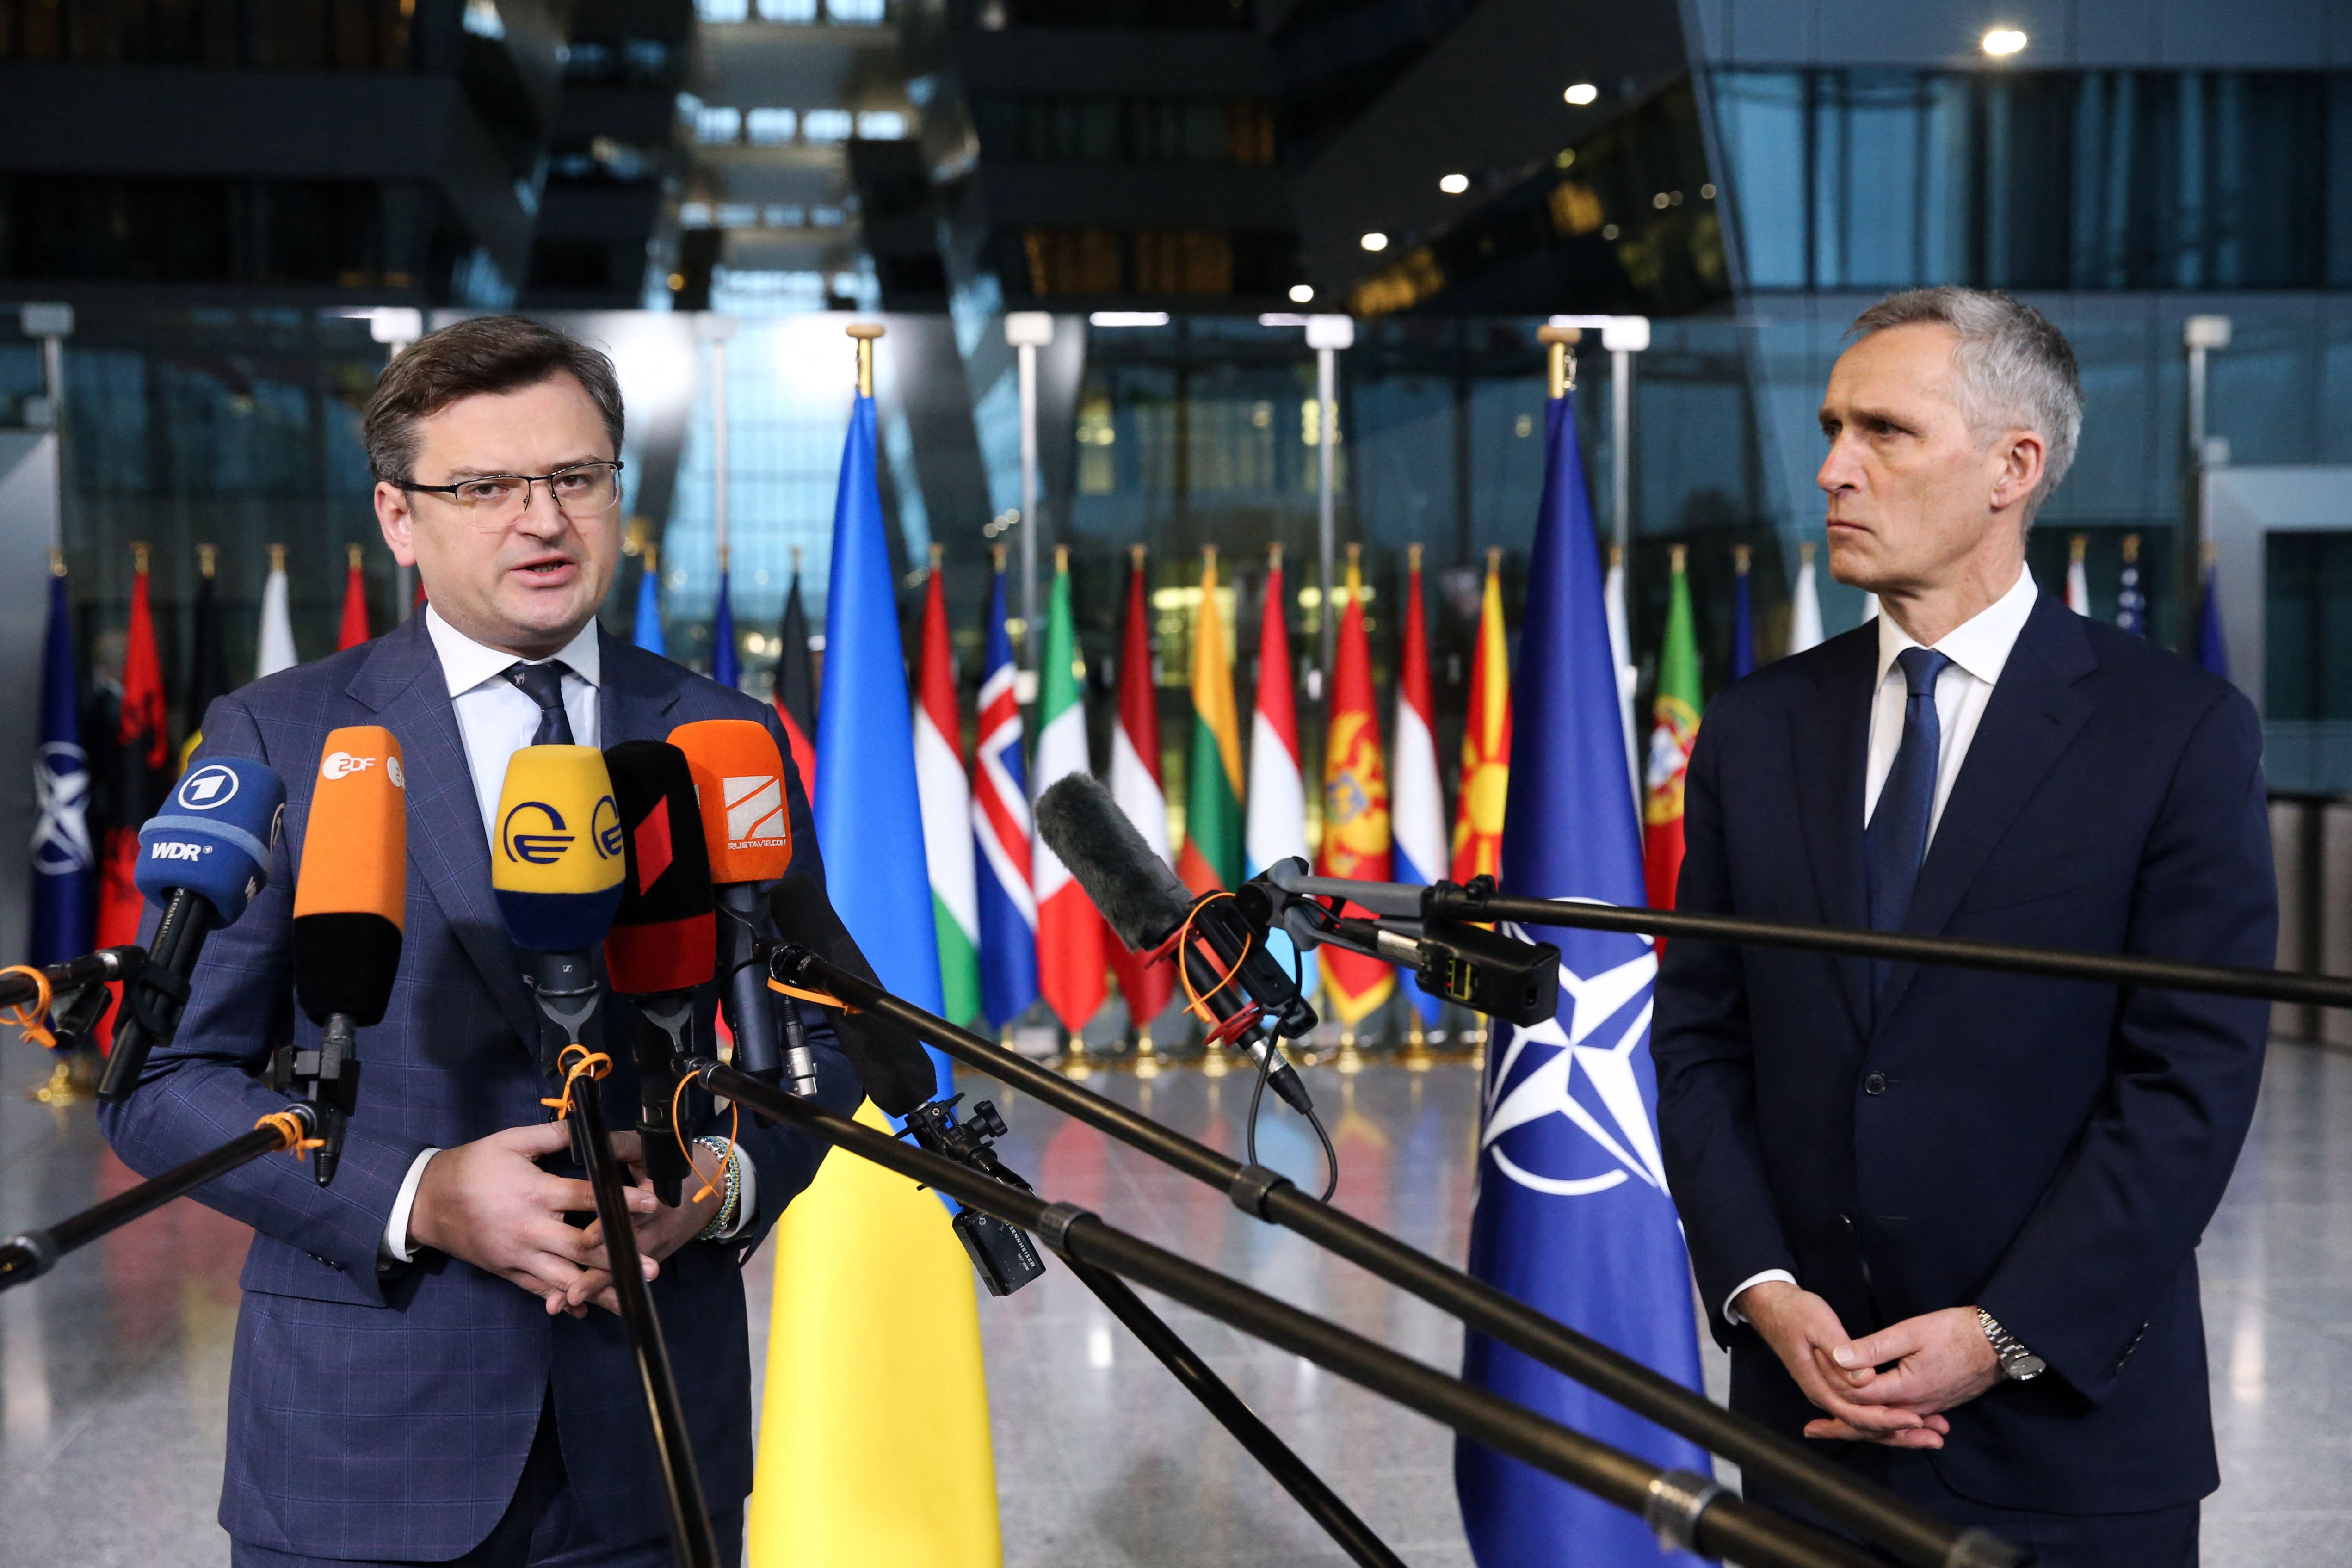 Ukraine's Foreign Minister Dmytro Kuleba, left, and NATO Secretary General Jens Stoltenberg speak to the media as they arrive for a meeting at NATO headquarters in Brussels on April 7.